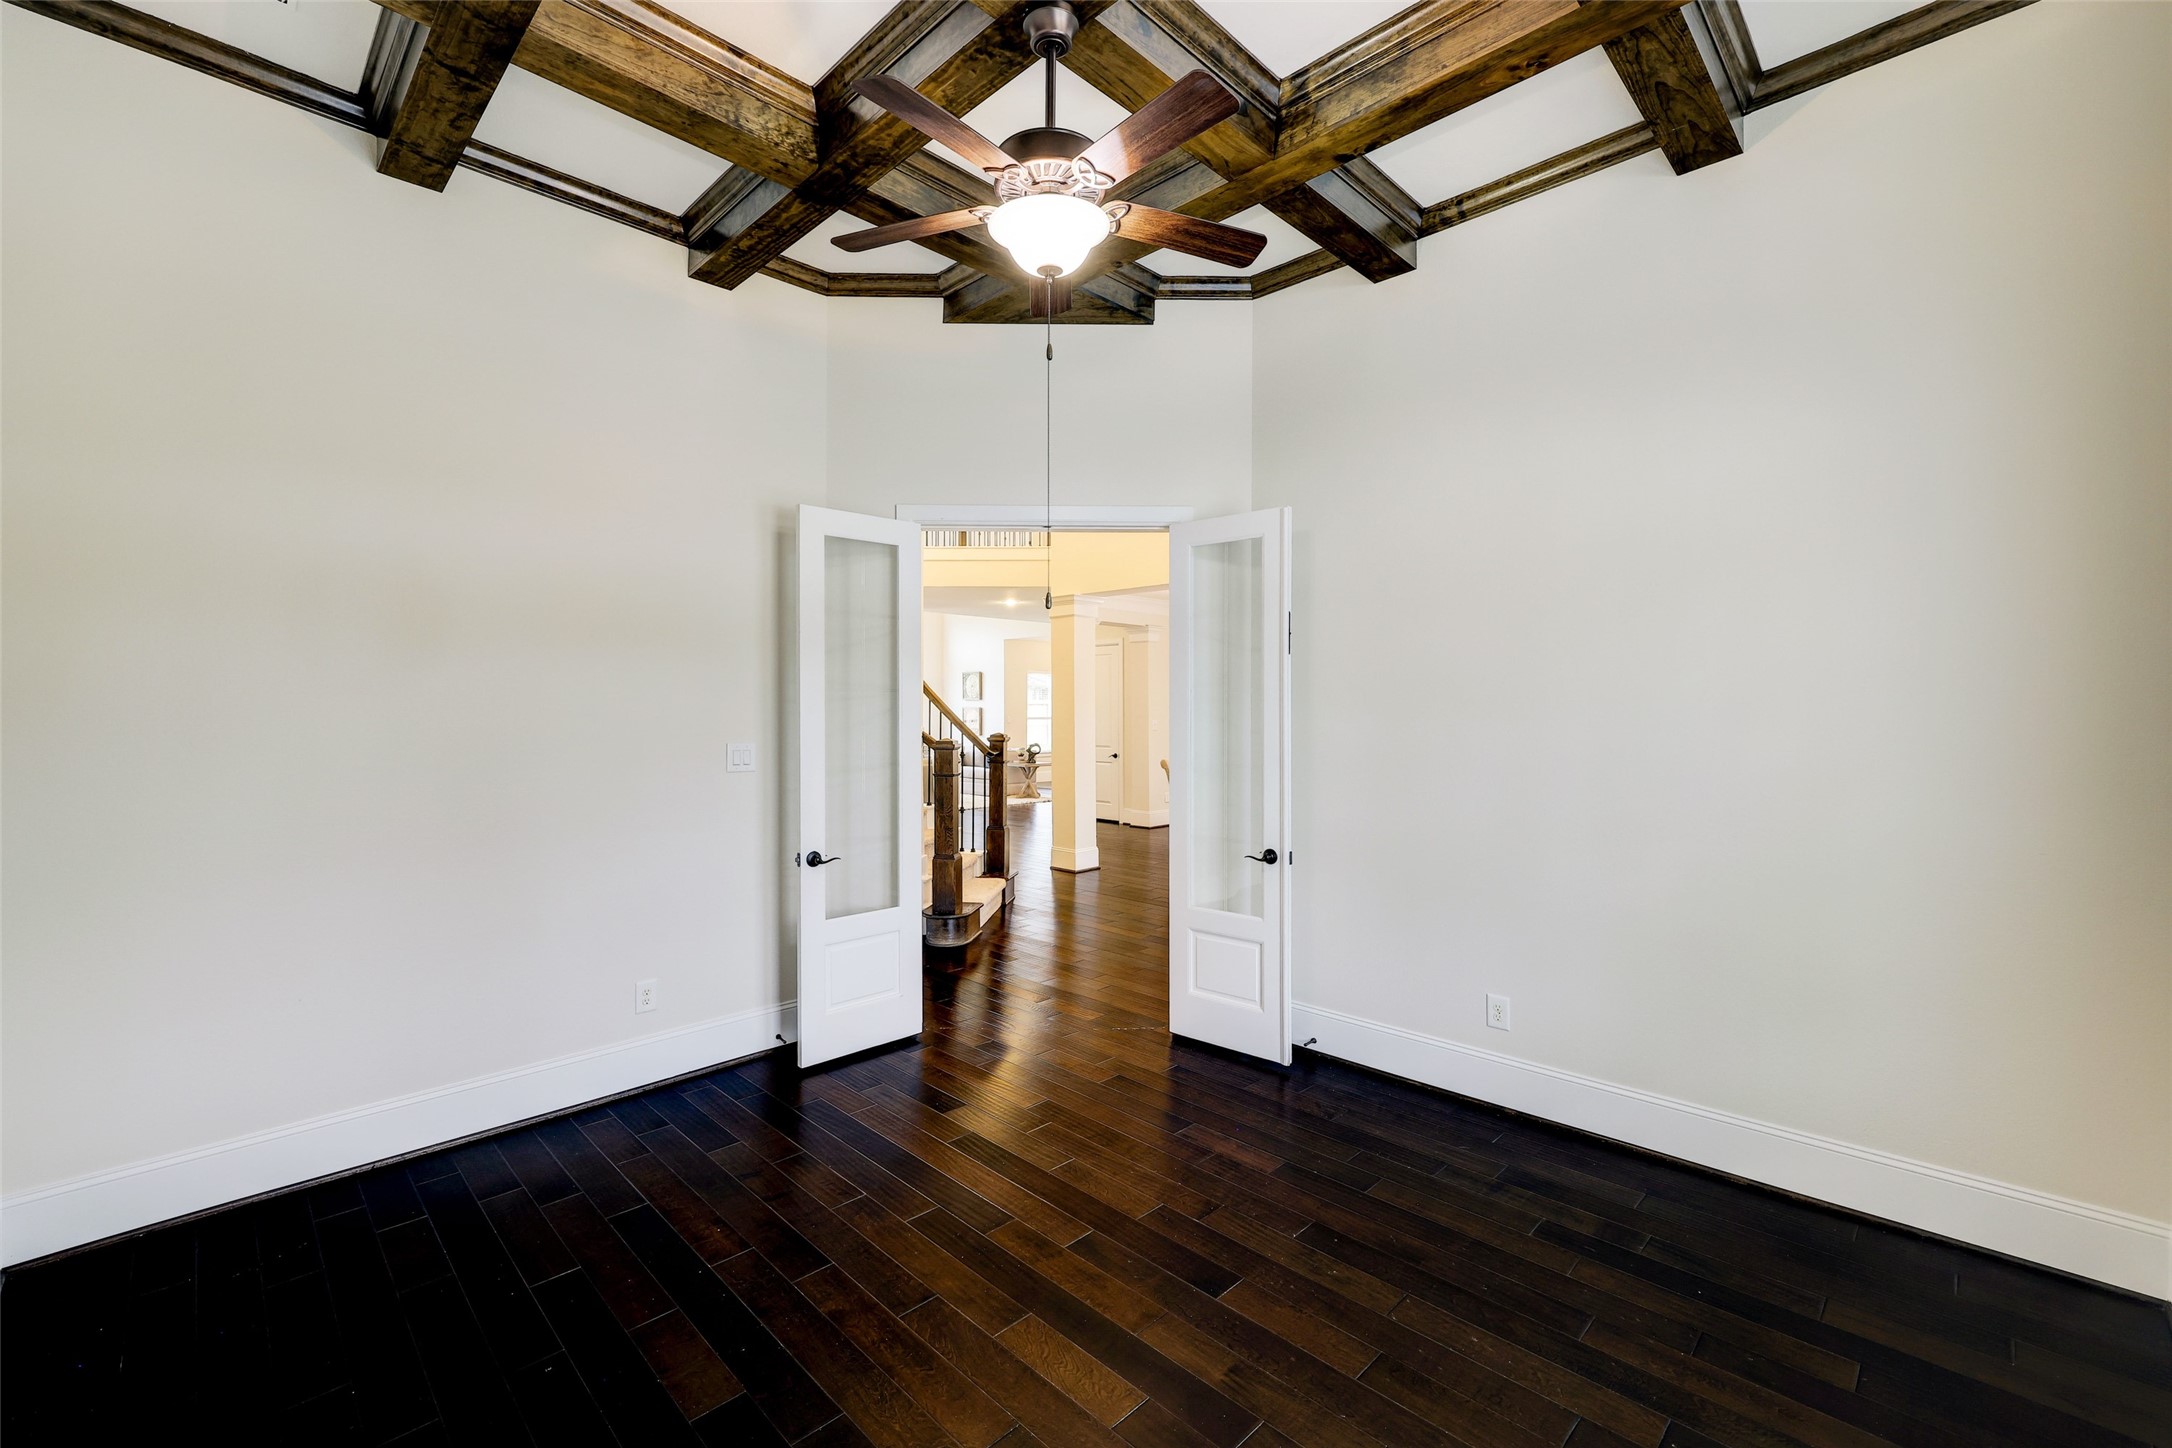 Double French doors provide privacy, while the dark wood flooring and wood coffered ceiling provide add richness to the space.